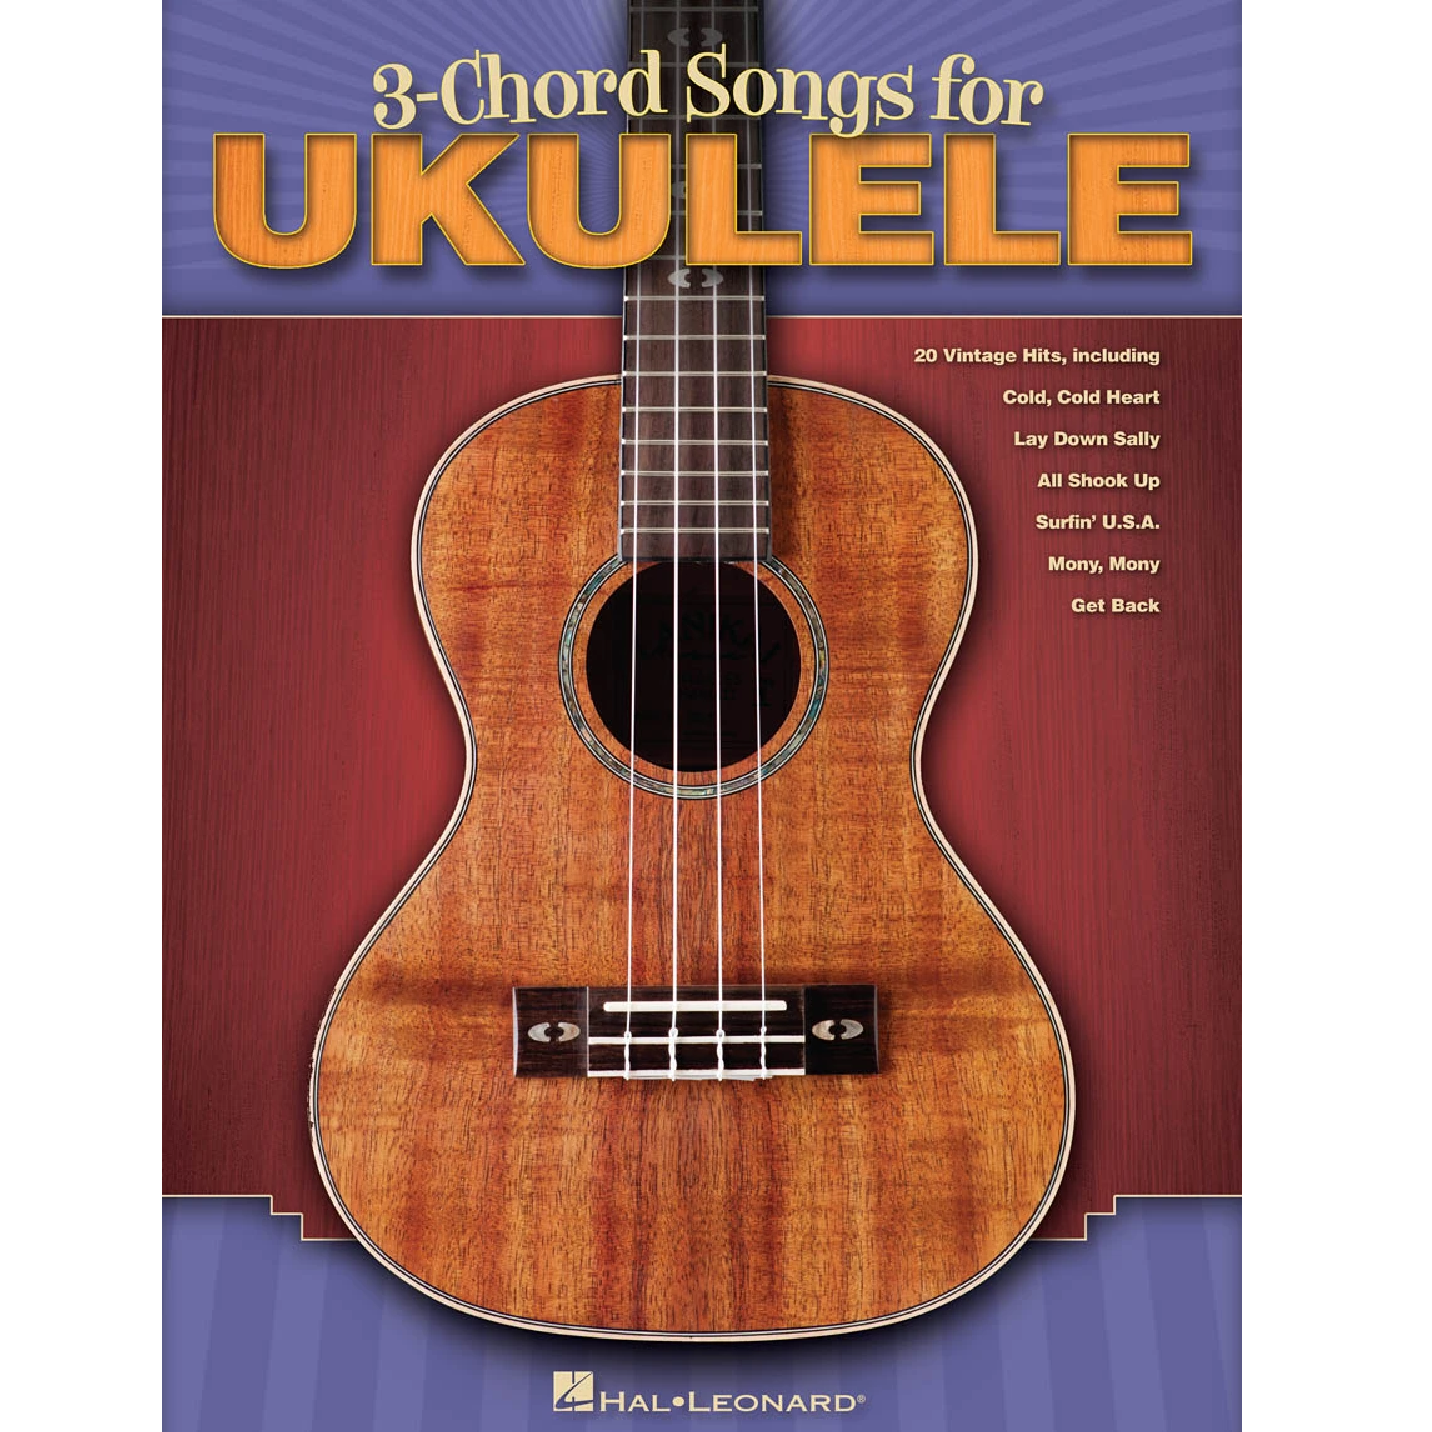 Ukulele - The Most Requested Songs book by Hal Leonard Corporation